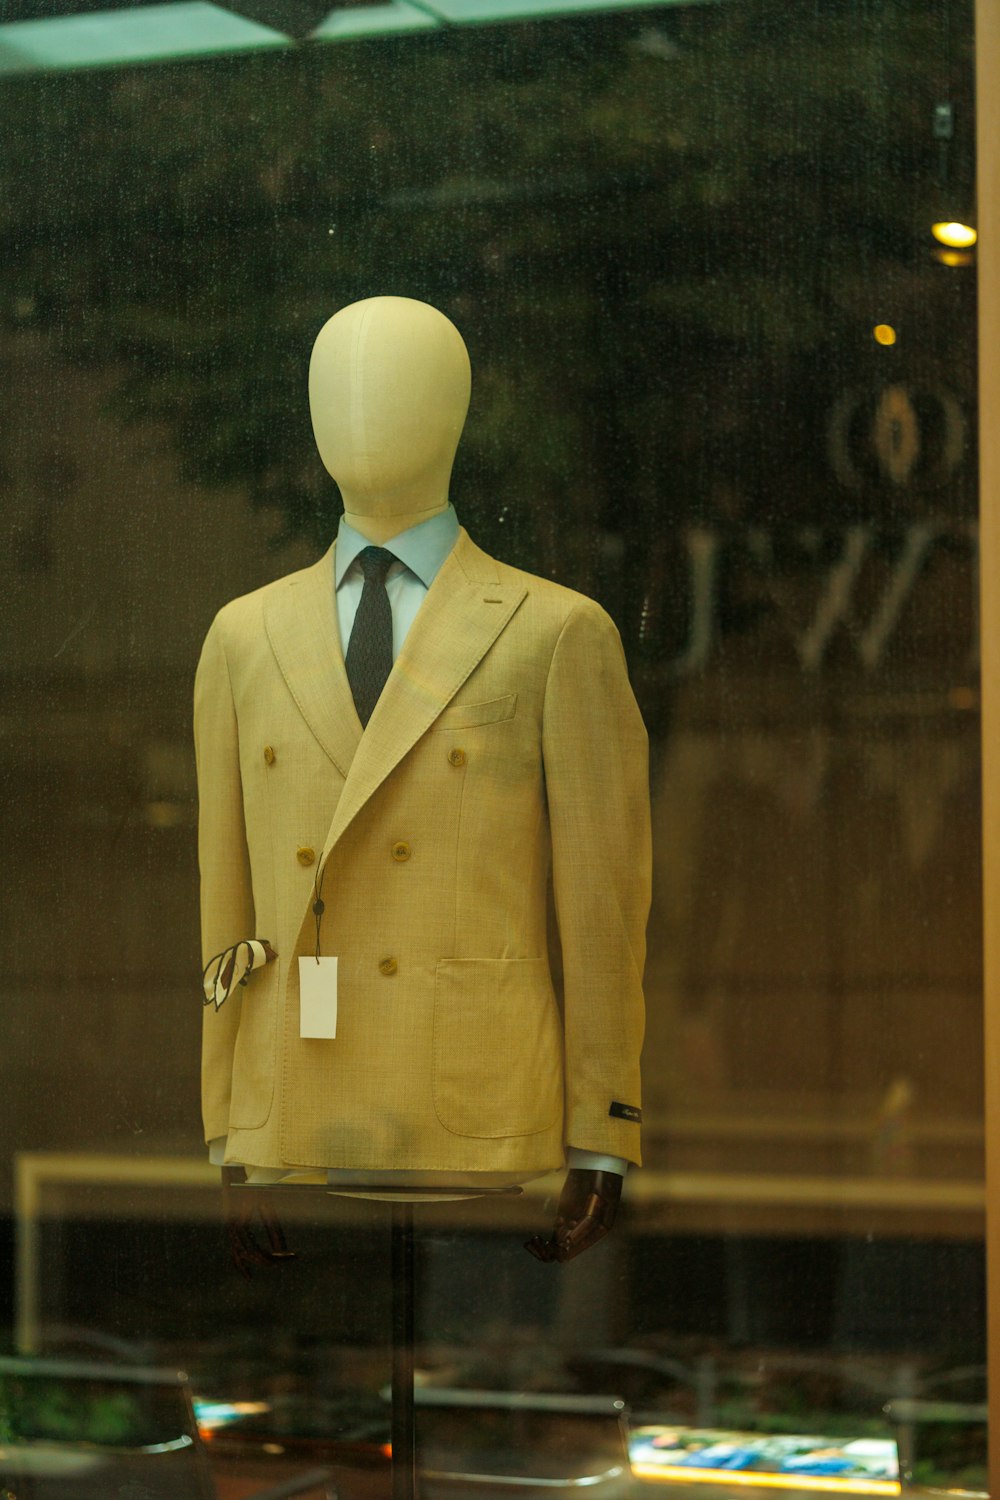 a mannequin wearing a suit and tie in a window